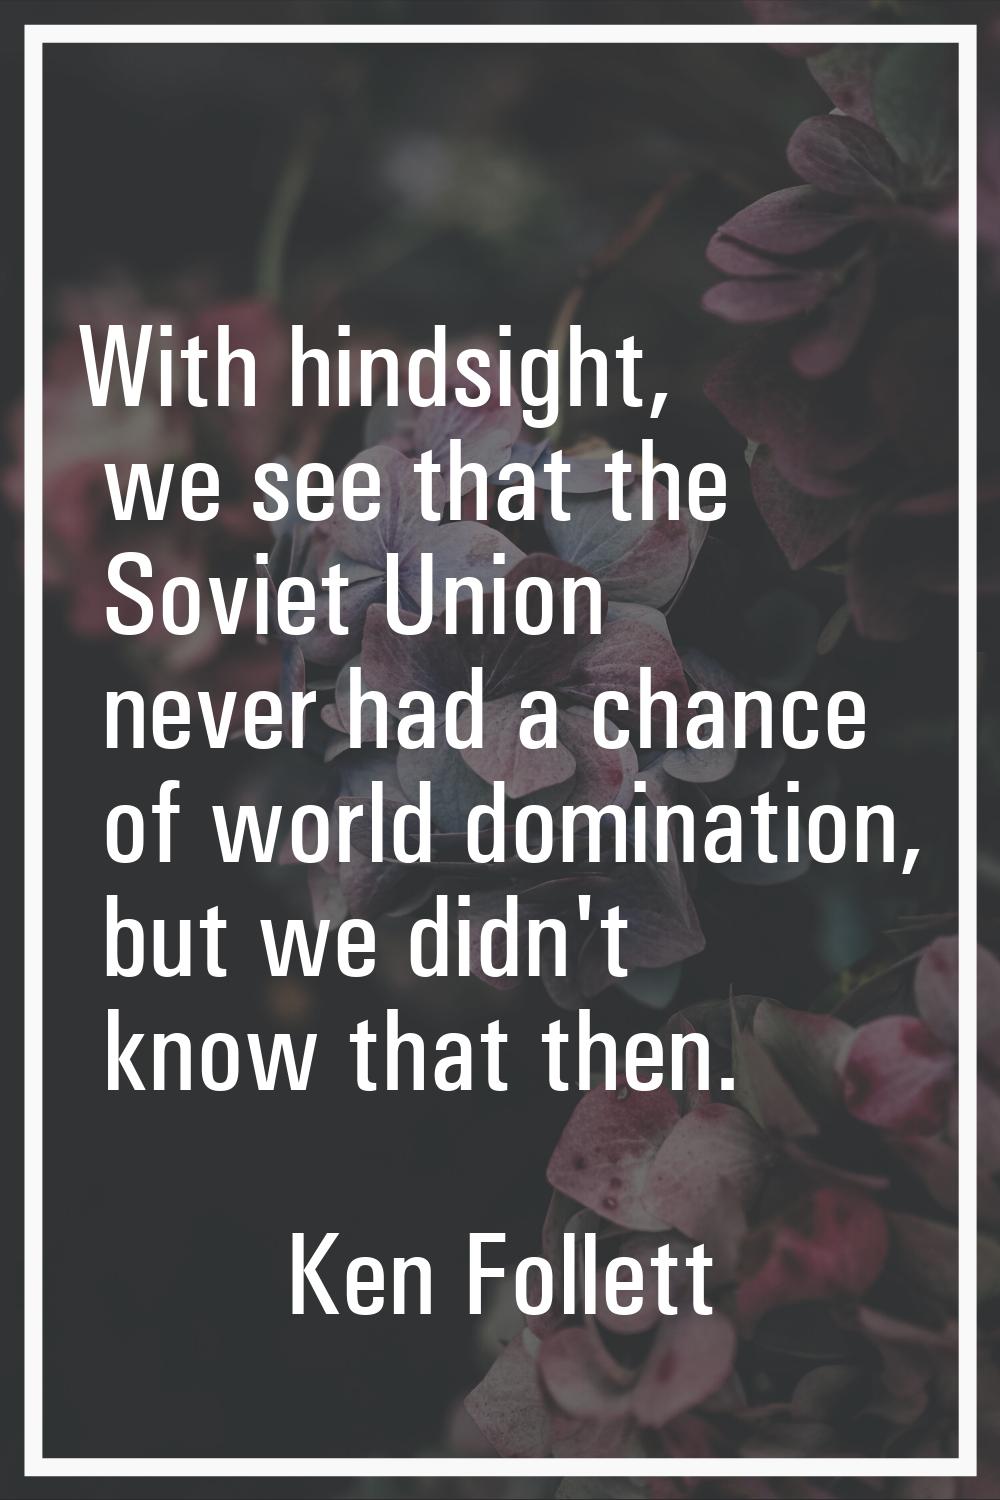 With hindsight, we see that the Soviet Union never had a chance of world domination, but we didn't 